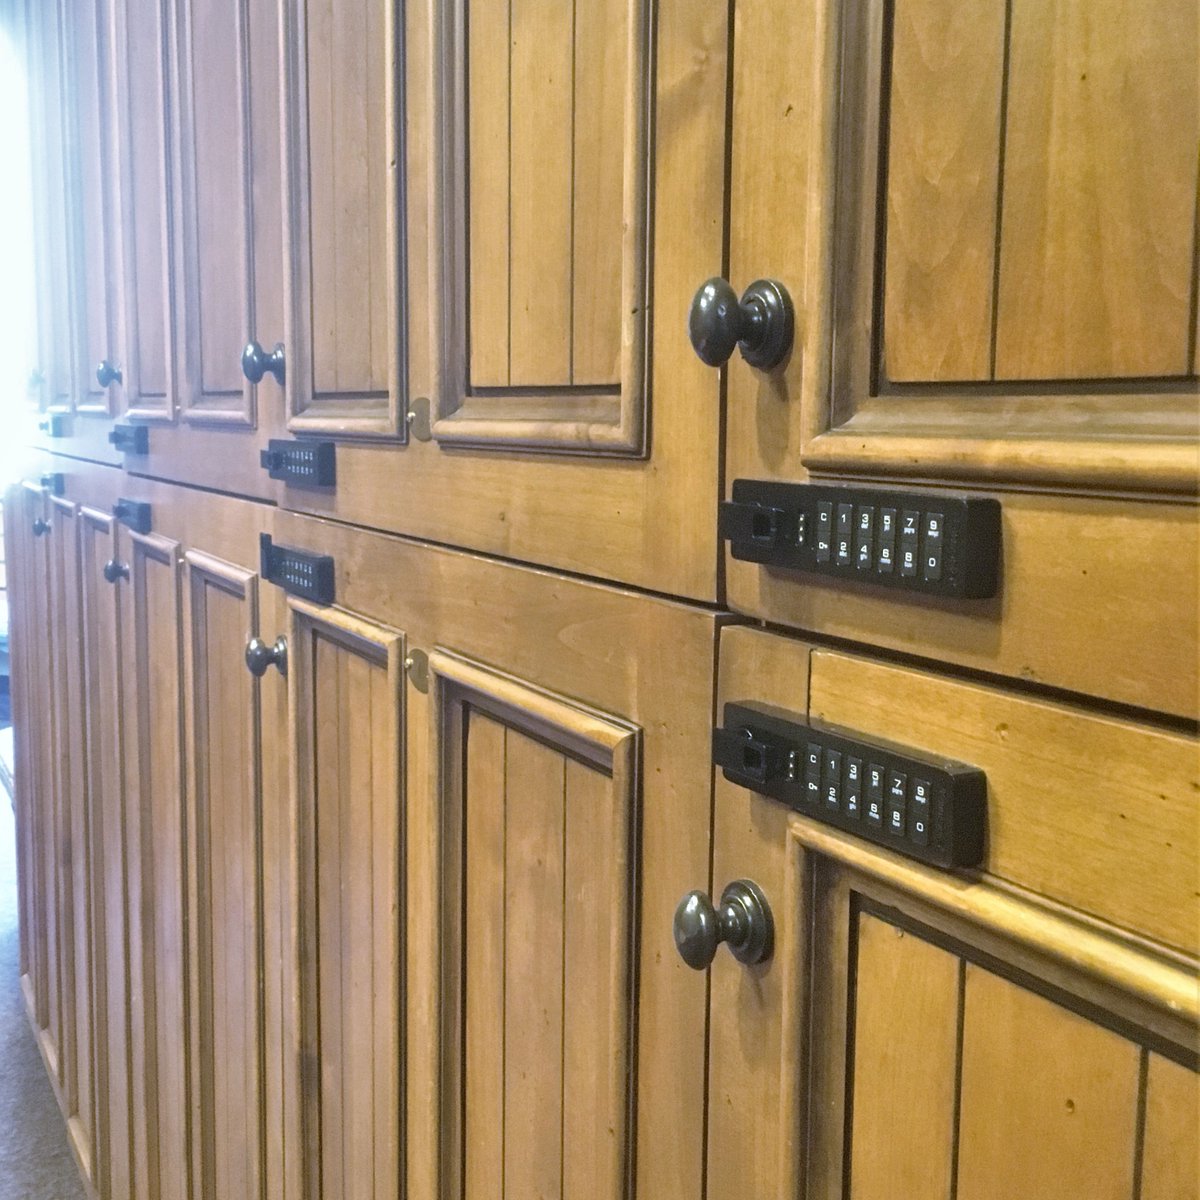 Trow back to when we installed a bajillion digital locks for the Telluride Ski and Golf Company... good times! We are working on another small batch for them currently. #customcabinets #cabinetlock #customlockers, #digitallocks